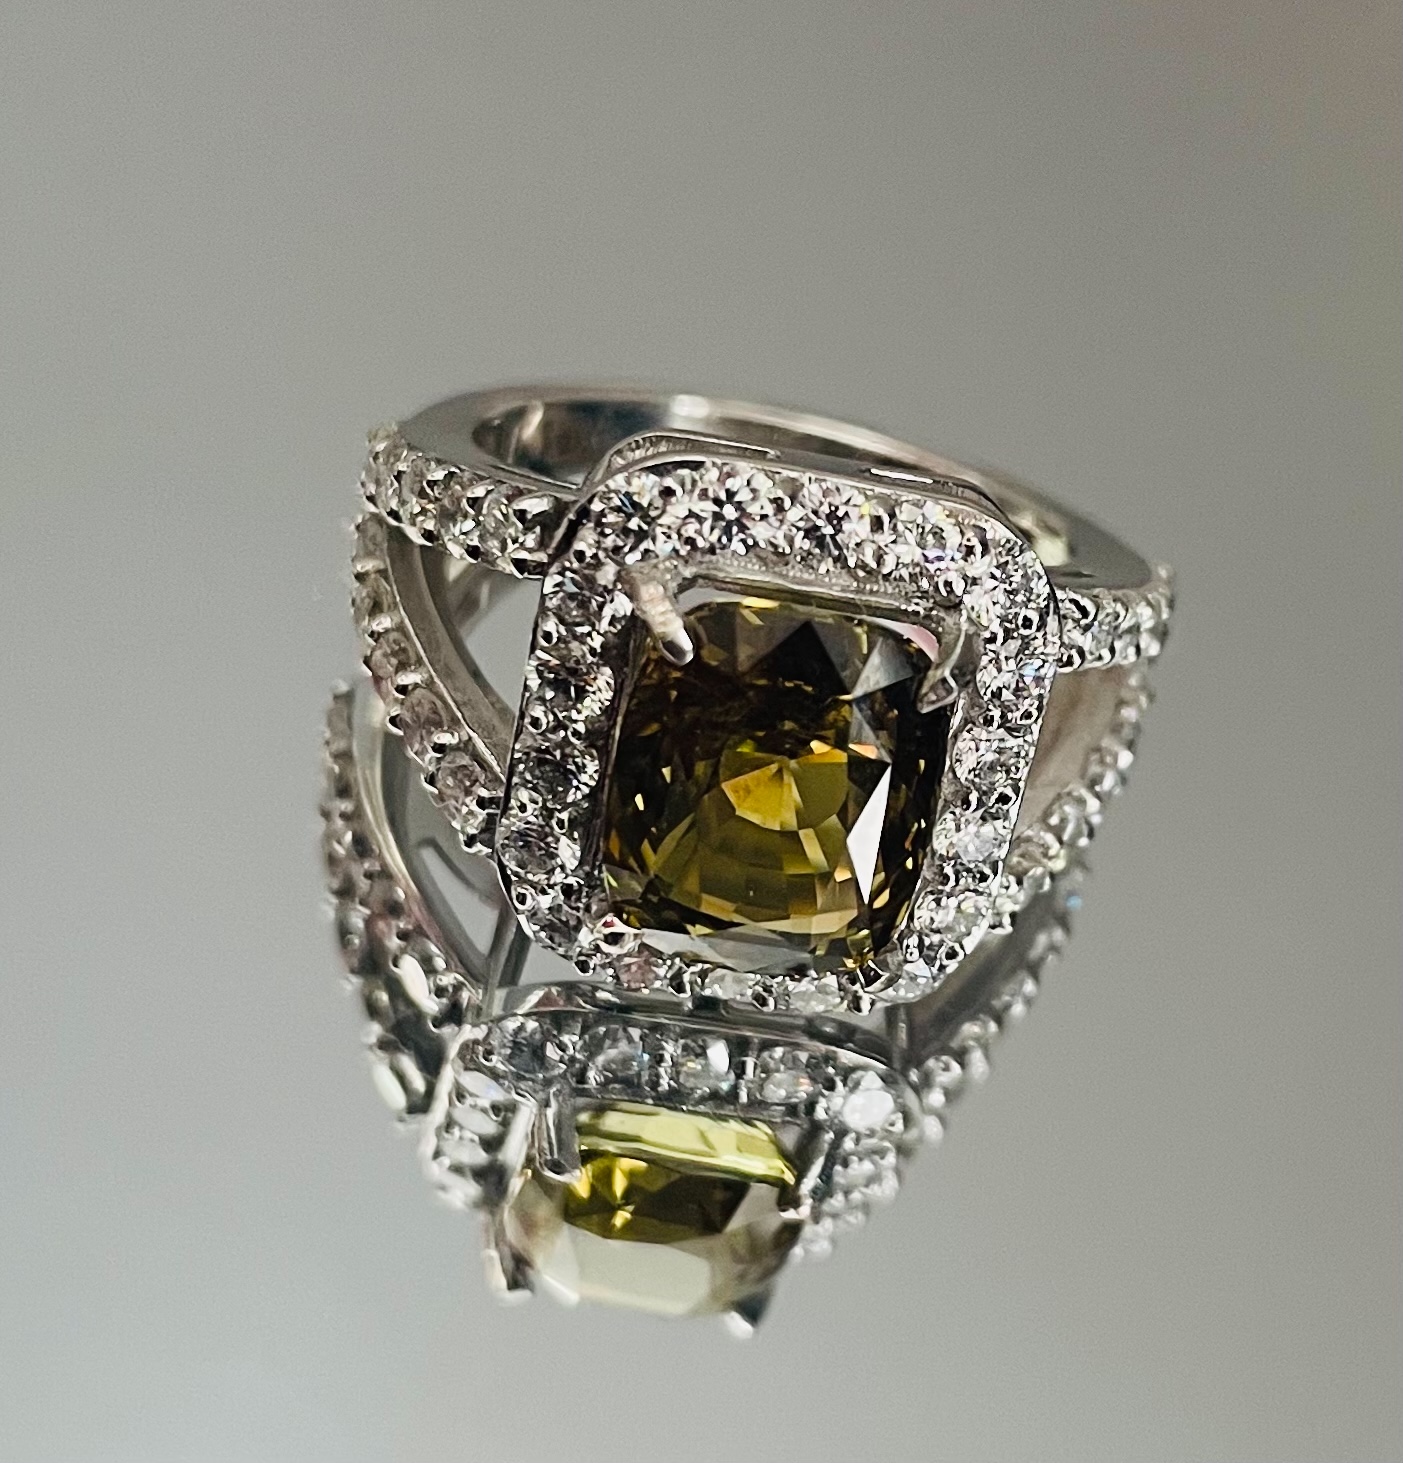 4.17Ct Natural Alexandrite Ring Unheated/Untreated with Diamonds & 18k Gold - Image 4 of 9